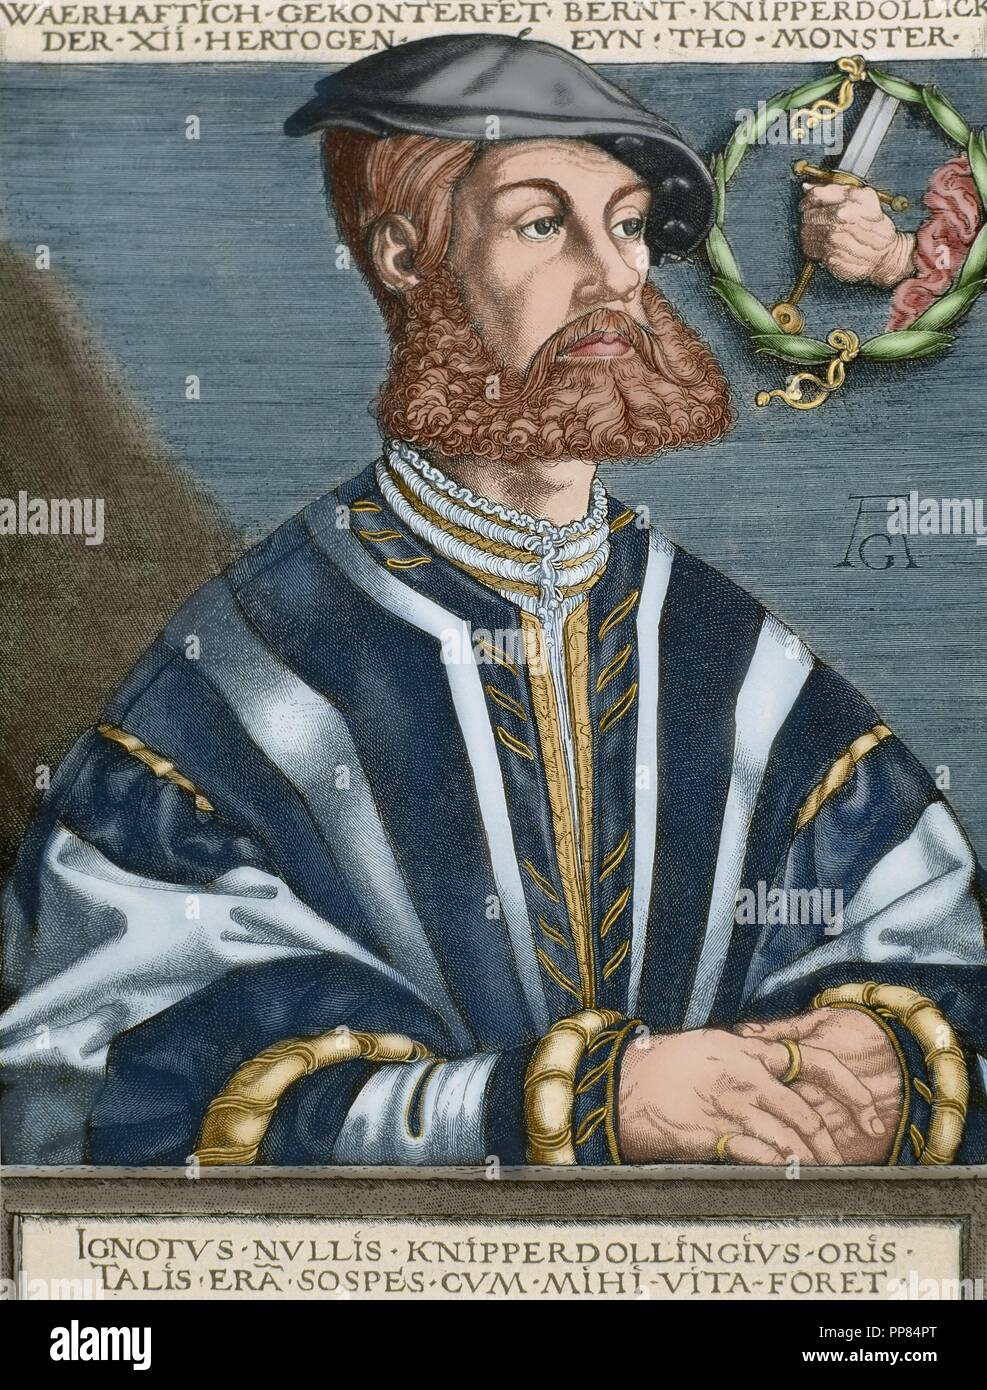 Bernhard Knipperdolling (c. 1495-1536). German leader of the Mu nster Anabaptists. Portrait. Engraving by Heinrich Aldegrever (1502-1555 or 1561). Colored. Stock Photo